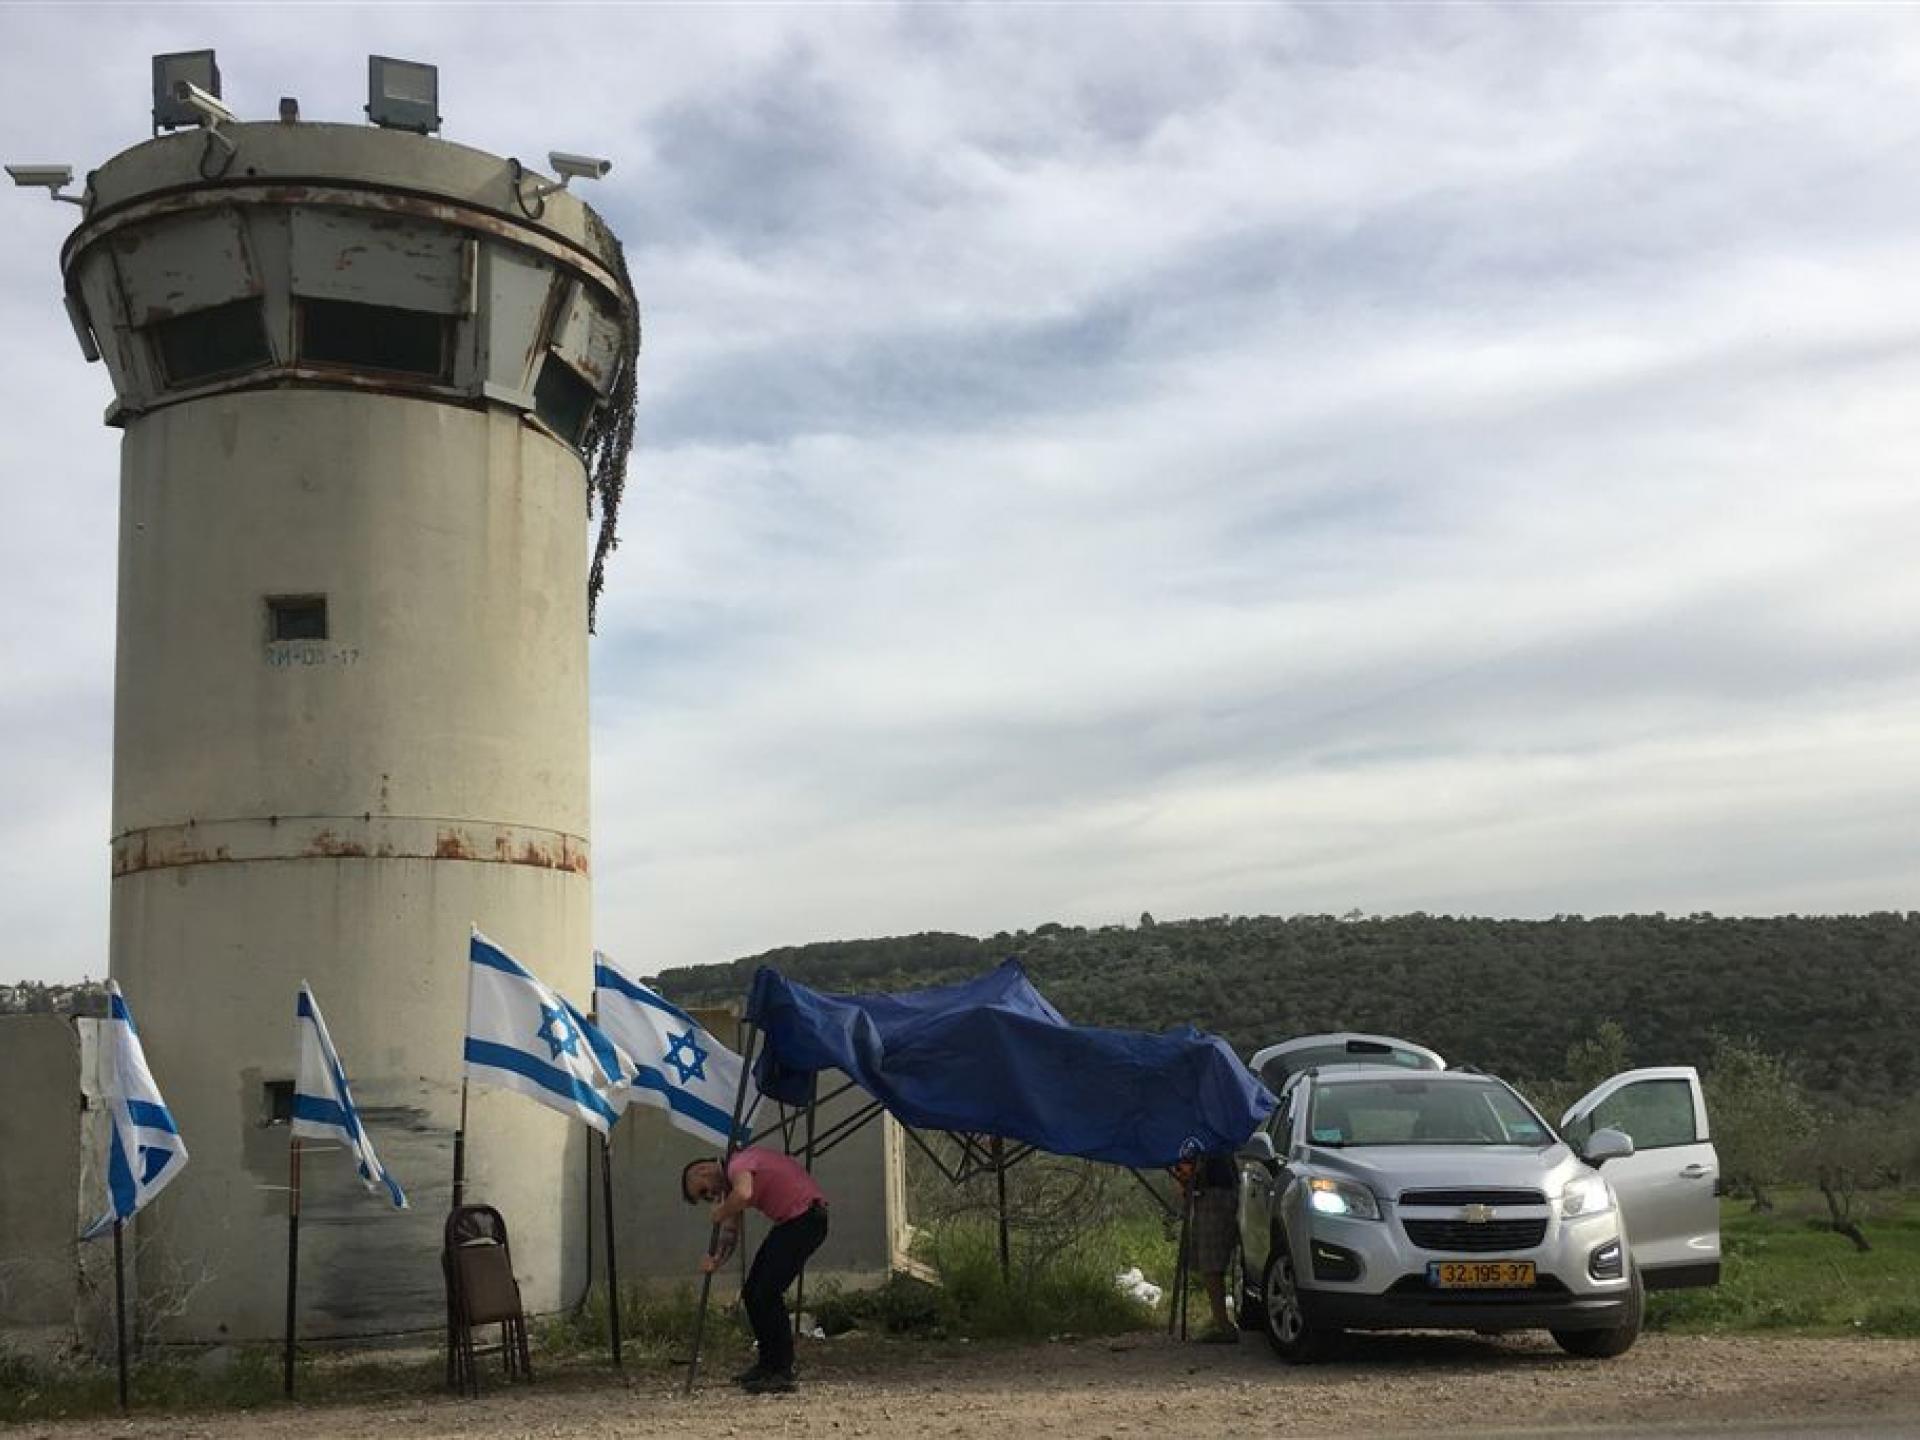 A mourning tent for prayers has been erected on the road leading to the Yaabed Dotan Checkpoint where the terrorist attack took place on March 16th